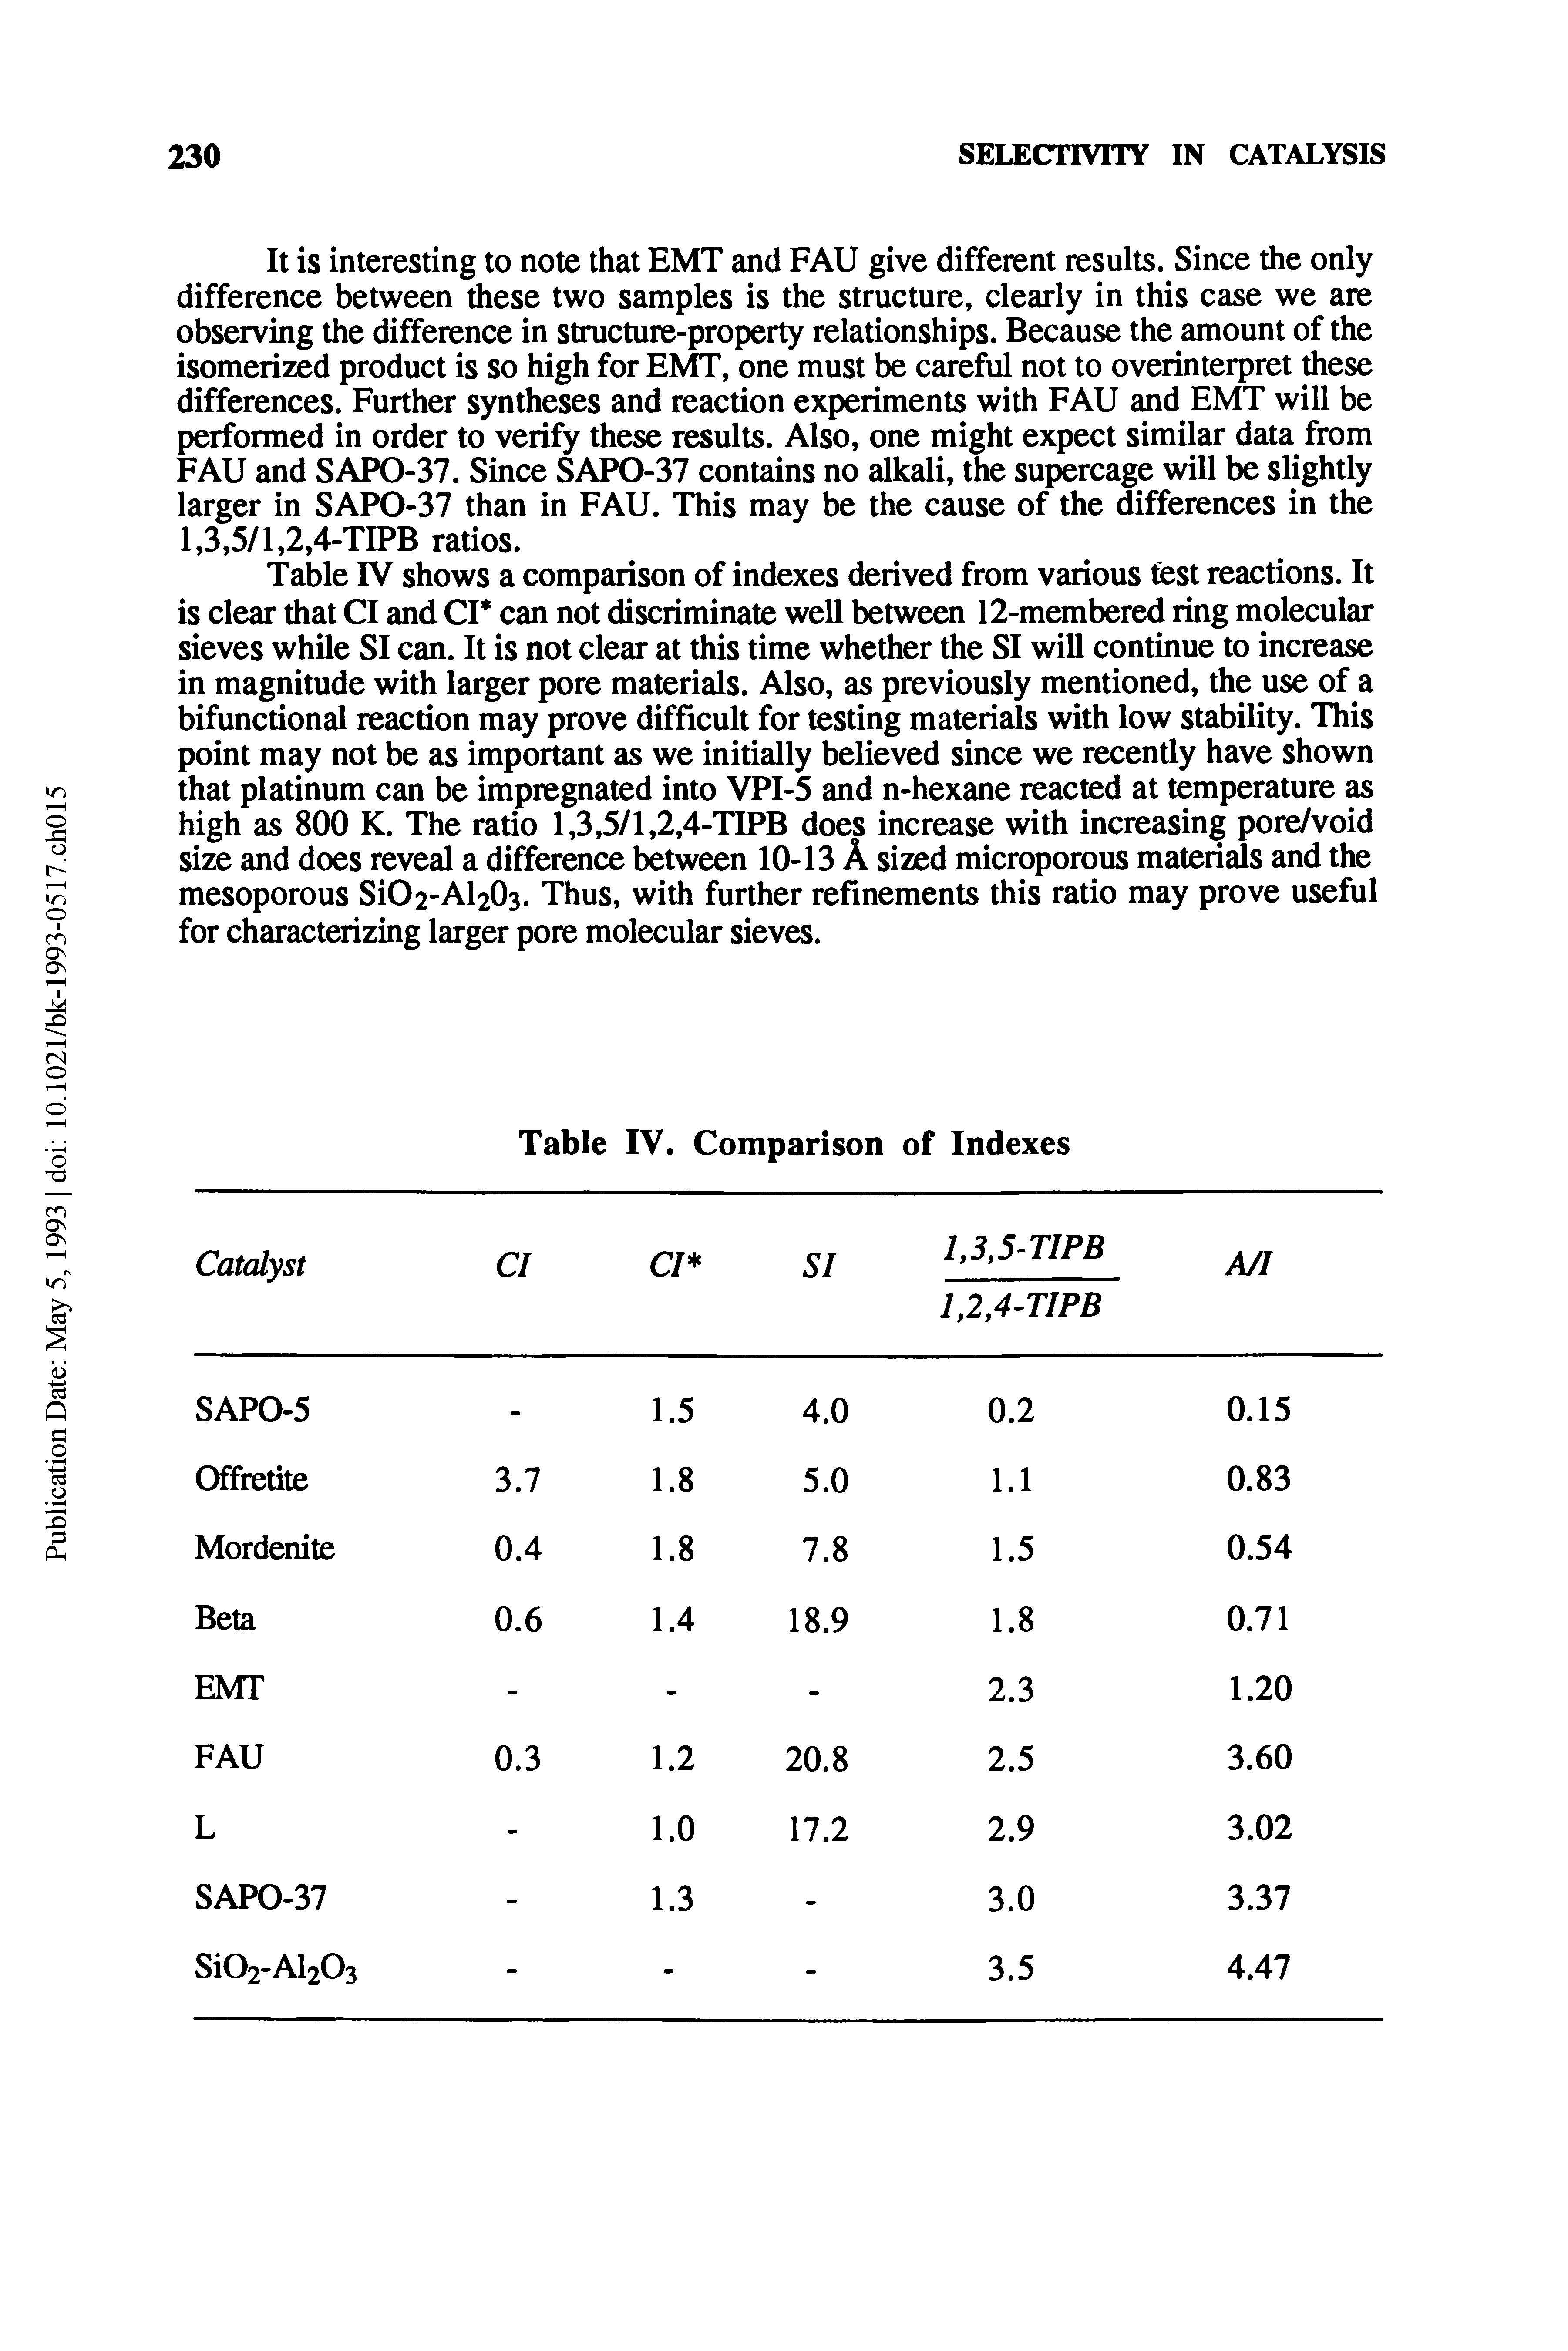 Table IV shows a comparison of indexes derived from various test reactions. It is clear that Cl and Cl can not discriminate well between 12-membered ring molecular sieves while SI can. It is not clear at this time whether the SI will continue to increase in magnitude with larger pore materials. Also, as previously mentioned, the use of a bifunctional reaction may prove difficult for testing materials with low stability. This point may not be as important as we initially believed since we recently have shown that platinum can be impregnated into VPI-5 and n-hexane reacted at temperature as high as 800 K. The ratio 1,3,5/1,2,4-TIPB does increase with increasing pore/void size and does reveal a difference between 10-13 A sized microporous materials and the mesoporous SiO2-Al203. Thus, with further refinements this ratio may prove useful for characterizing larger pore molecular sieves.